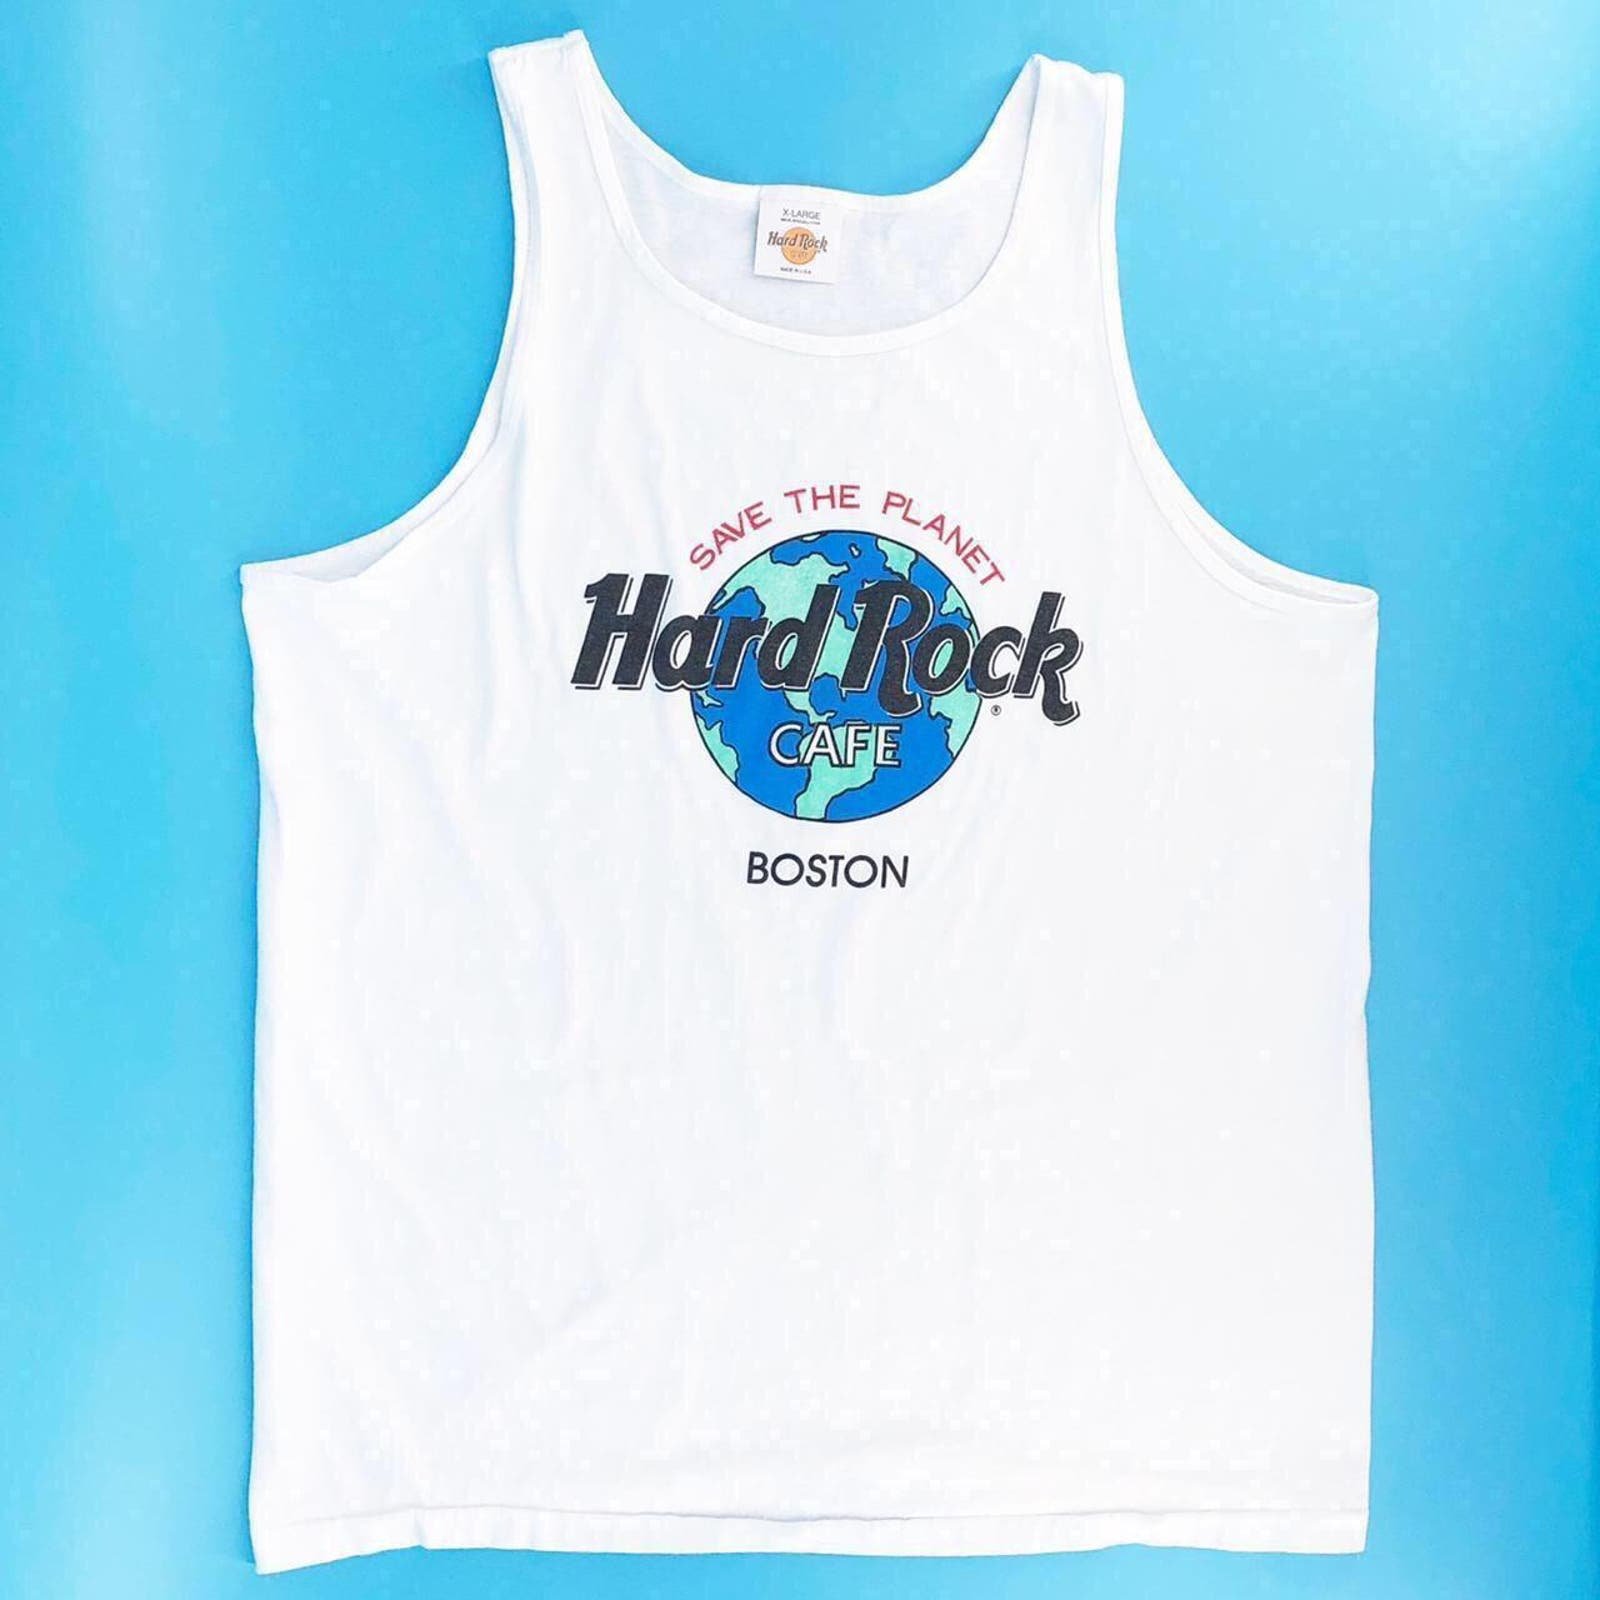 Hard Rock Cafe Boston Save the Planet tank top 90s 1990